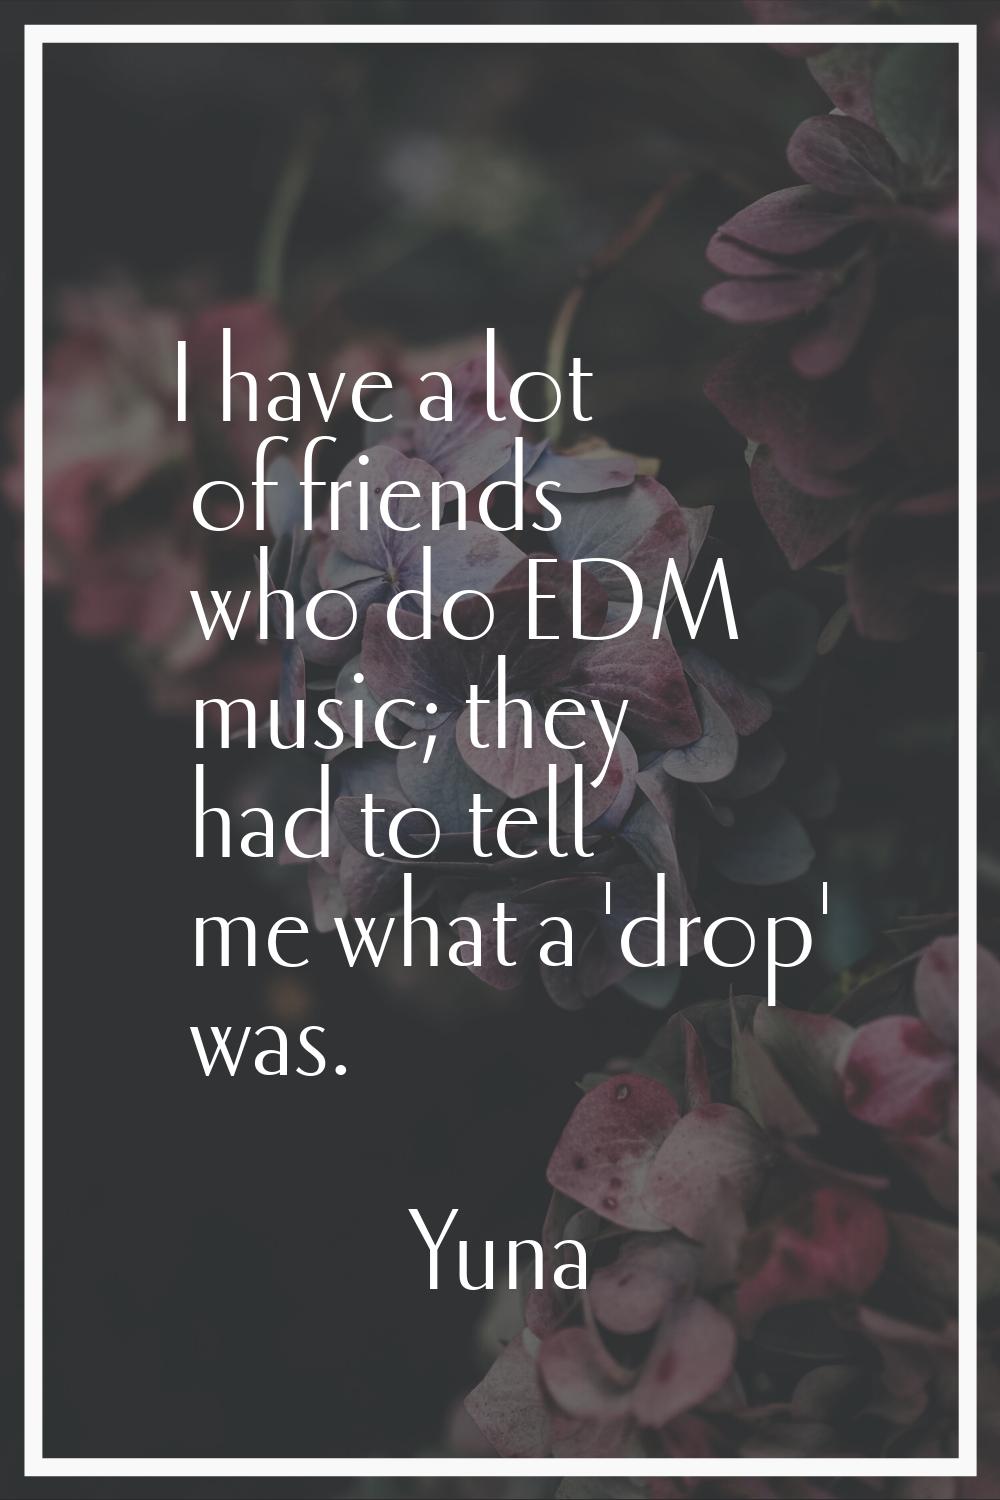 I have a lot of friends who do EDM music; they had to tell me what a 'drop' was.